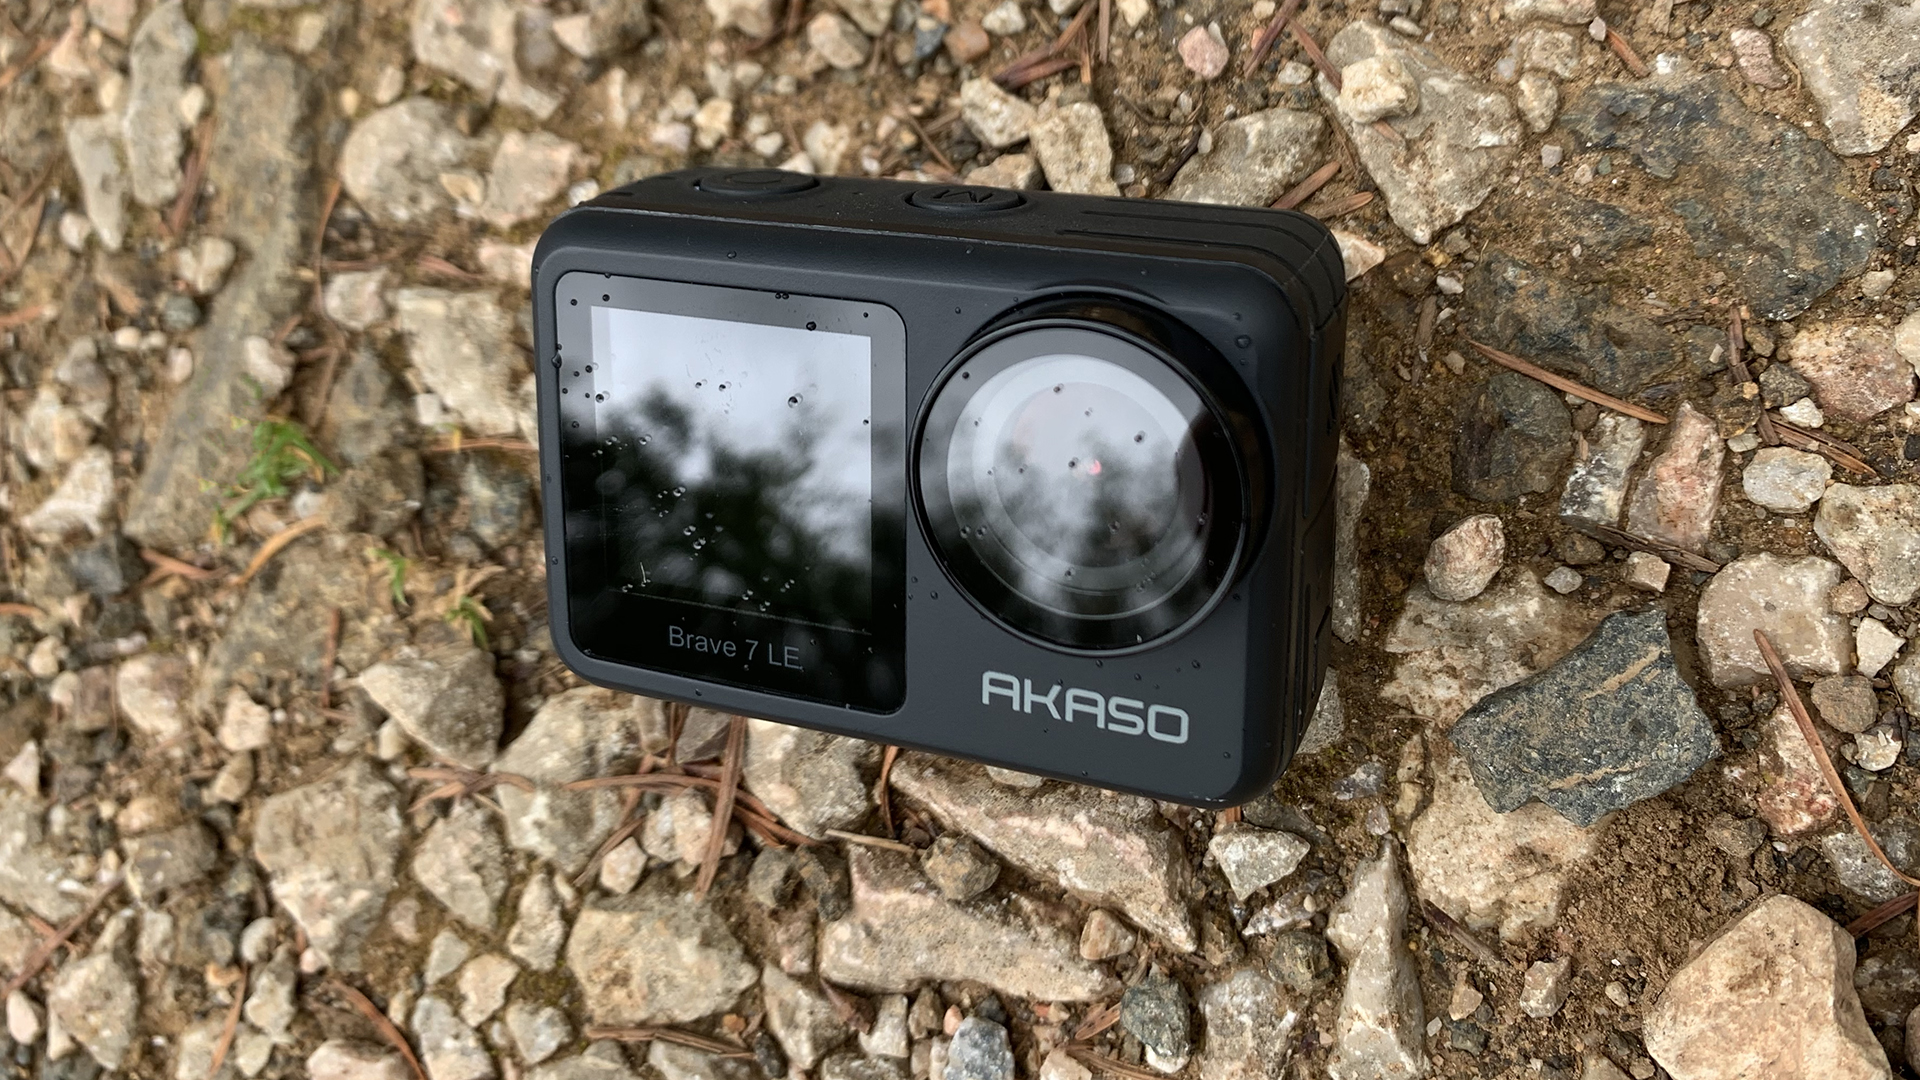 Akaso Brave 7 LE action camera review: A front screen-enabled action cam  with a bargain price tag